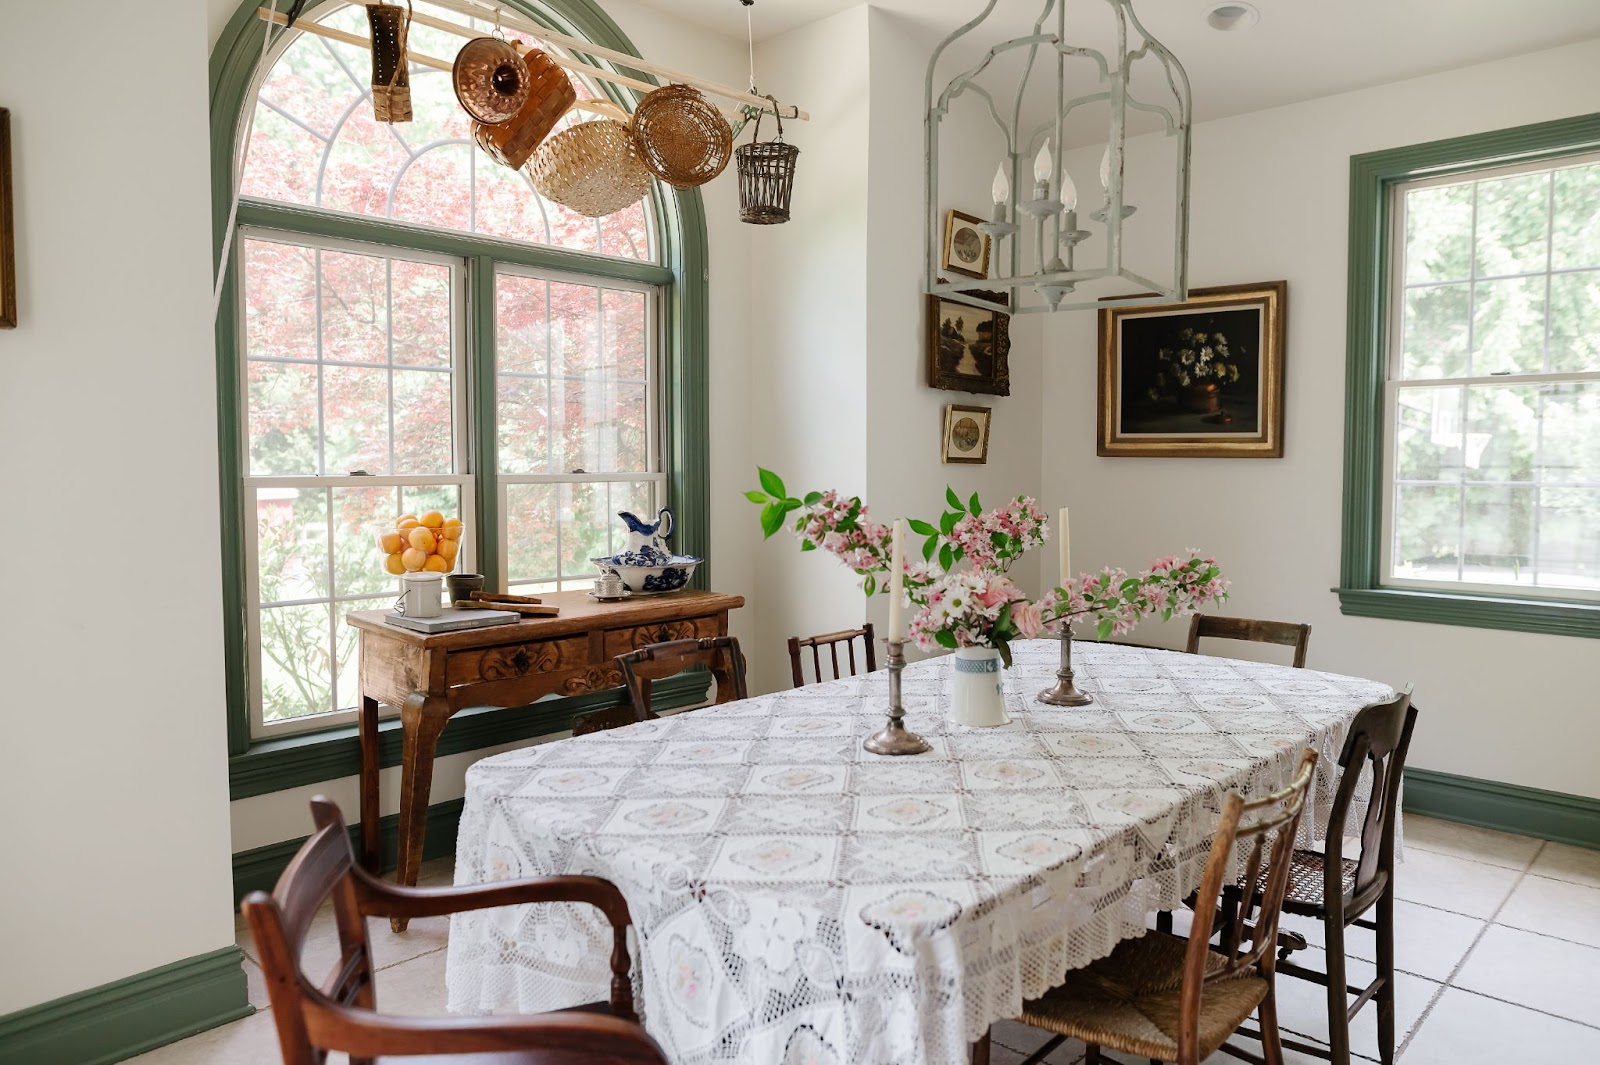 A light and airy dining area featuring white walls and green trim, a table covered in a lace tablecloth, floral centerpieces and candlesticks along with works of art on the walls.